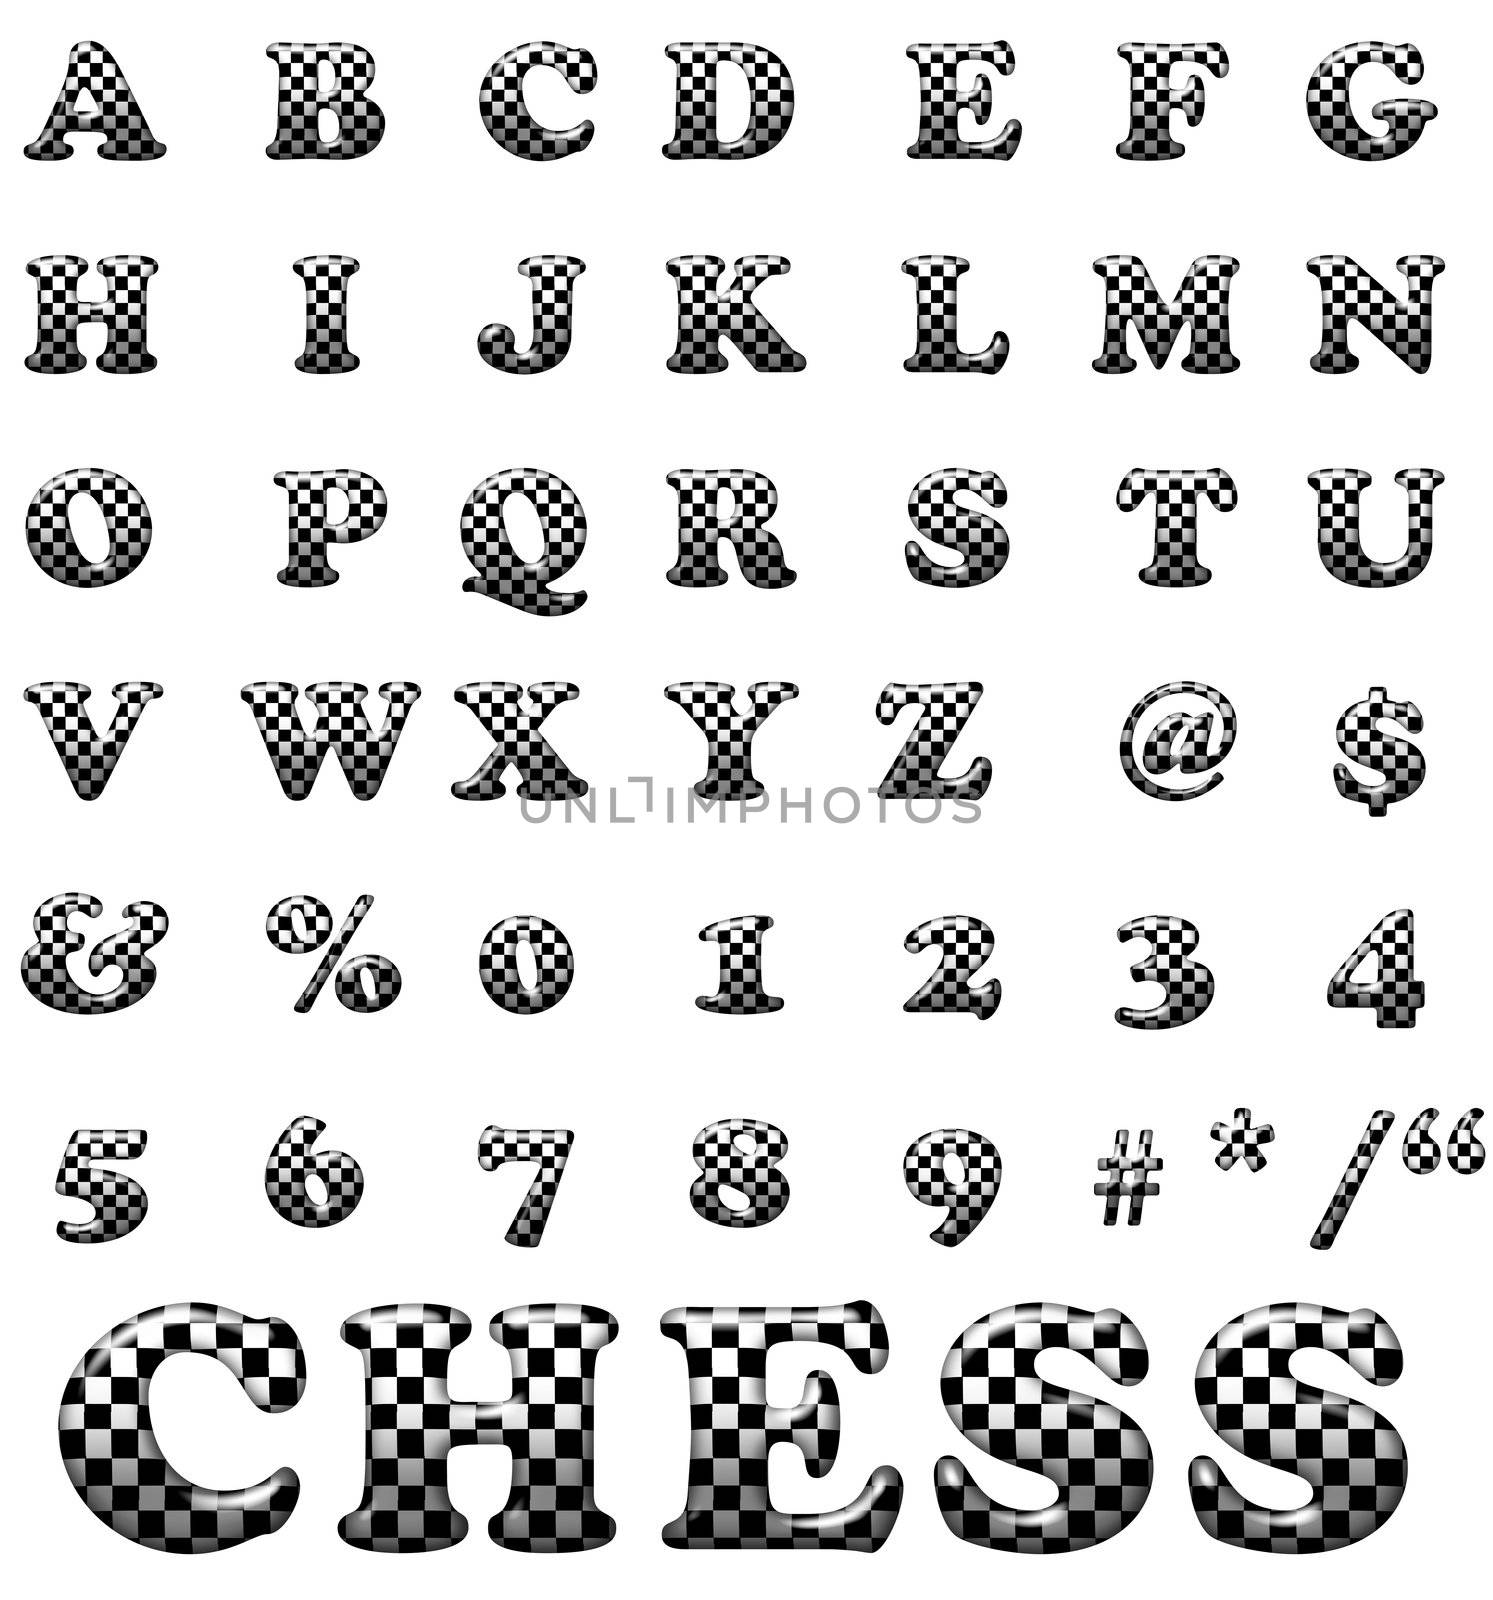 Exclusive collection letters with chess square on white background. White and black illustrated chess square letters.